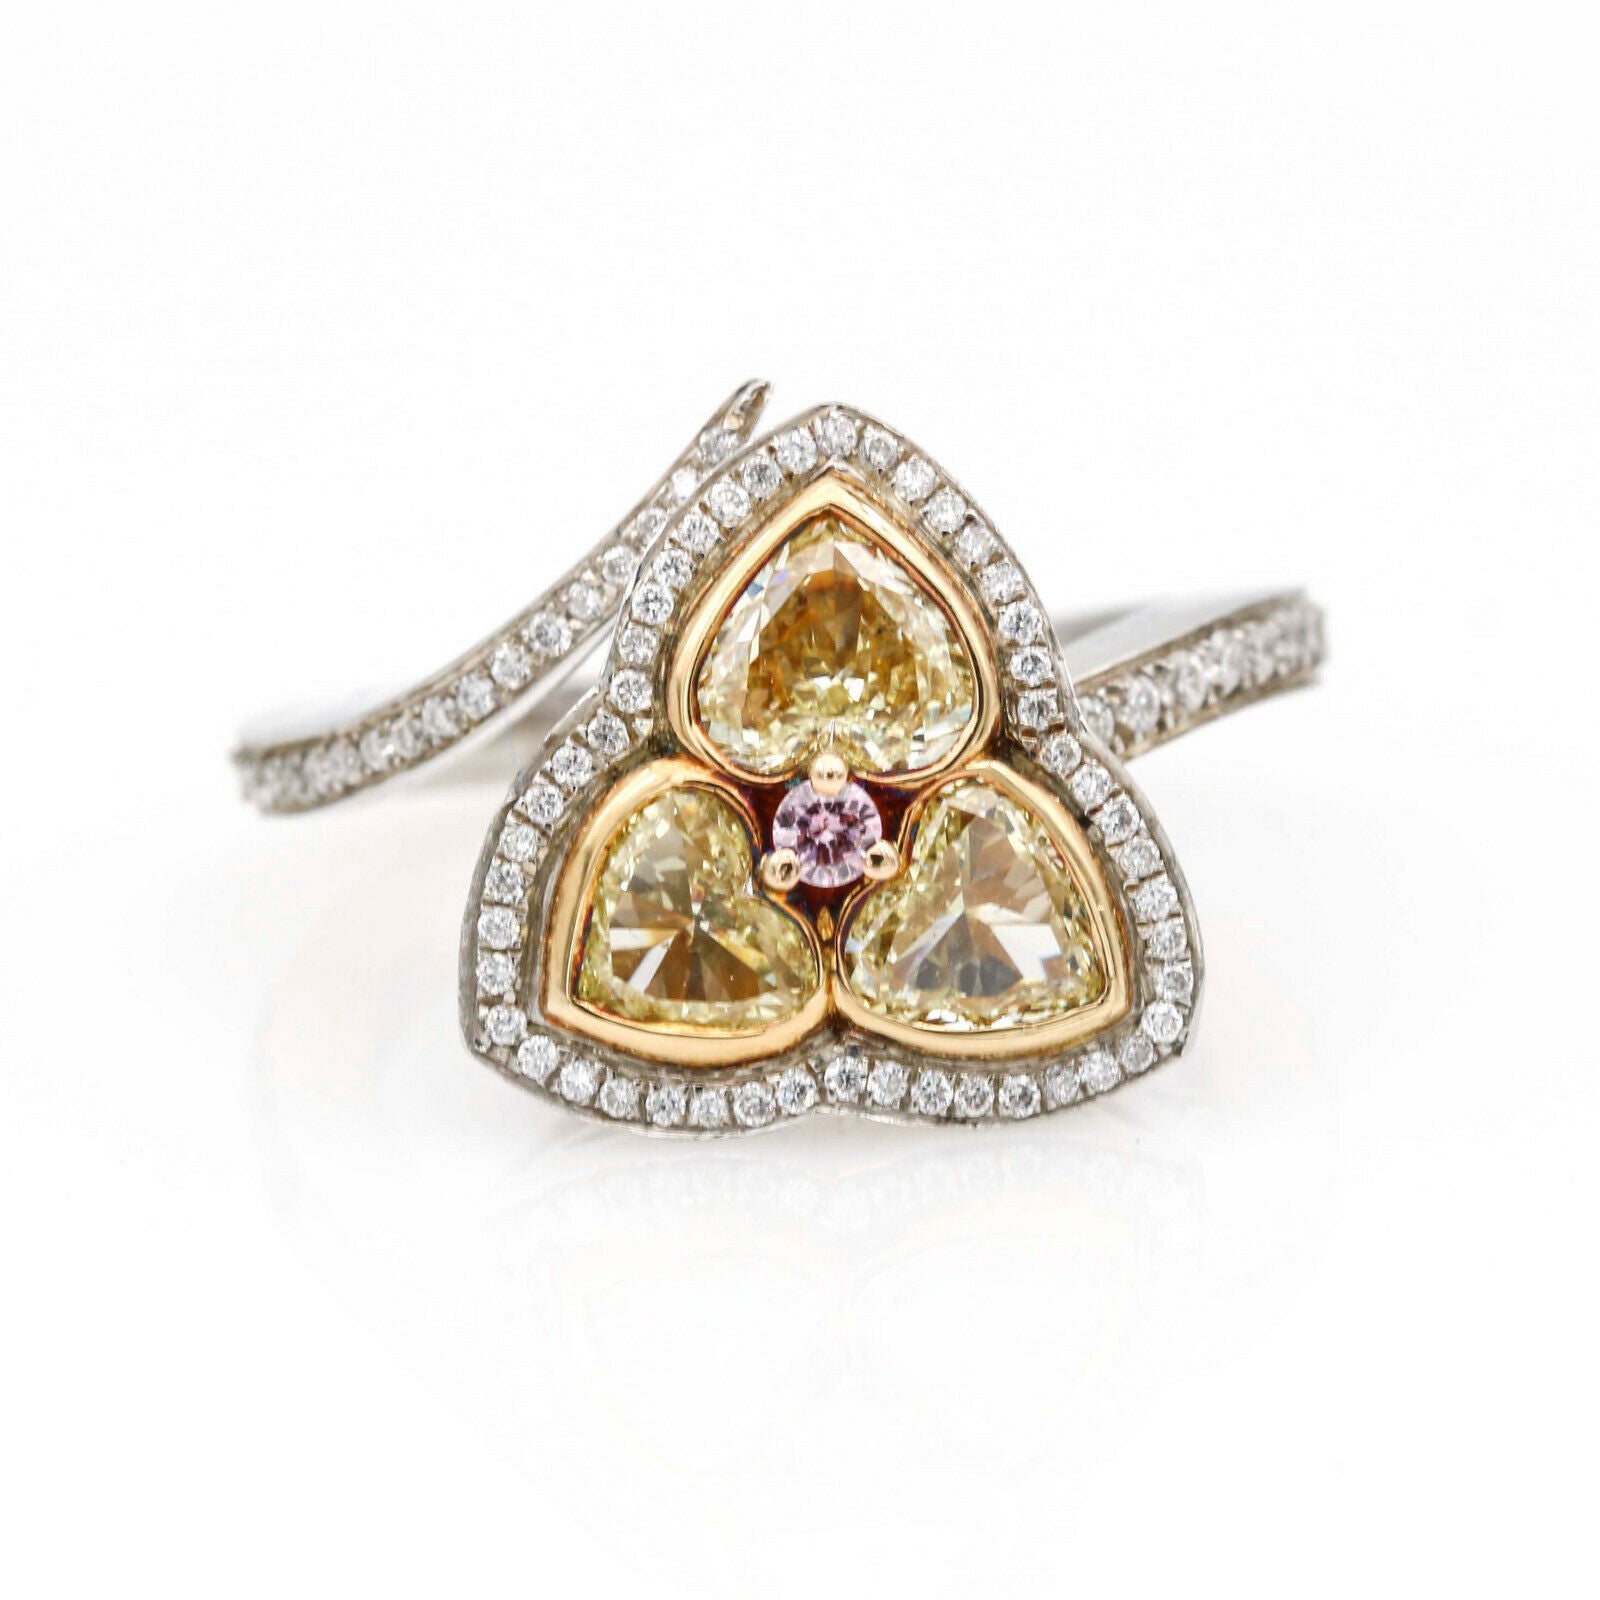 Fancy Yellow Heart Diamonds Ring in Platinum and 18k Gold